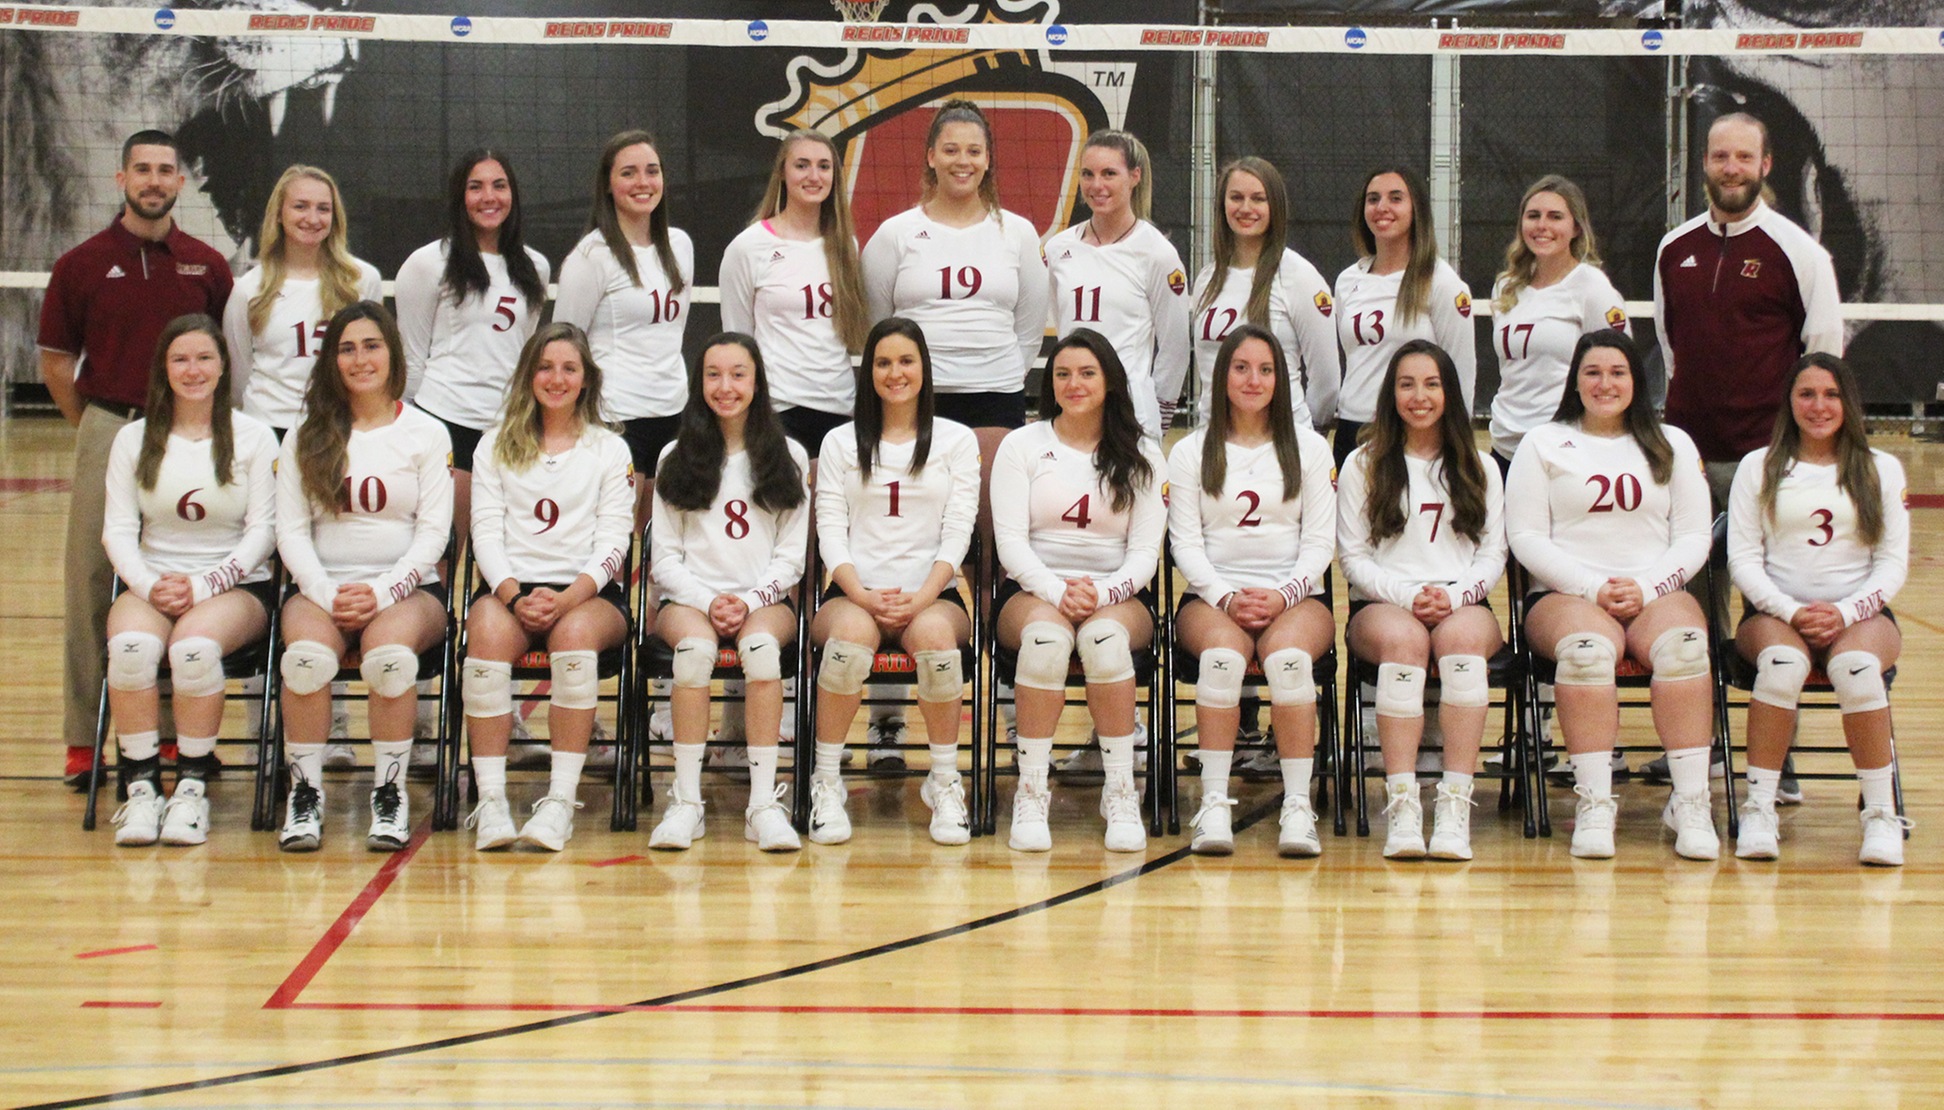 2018 Regis Women’s Volleyball: Never Giving Up